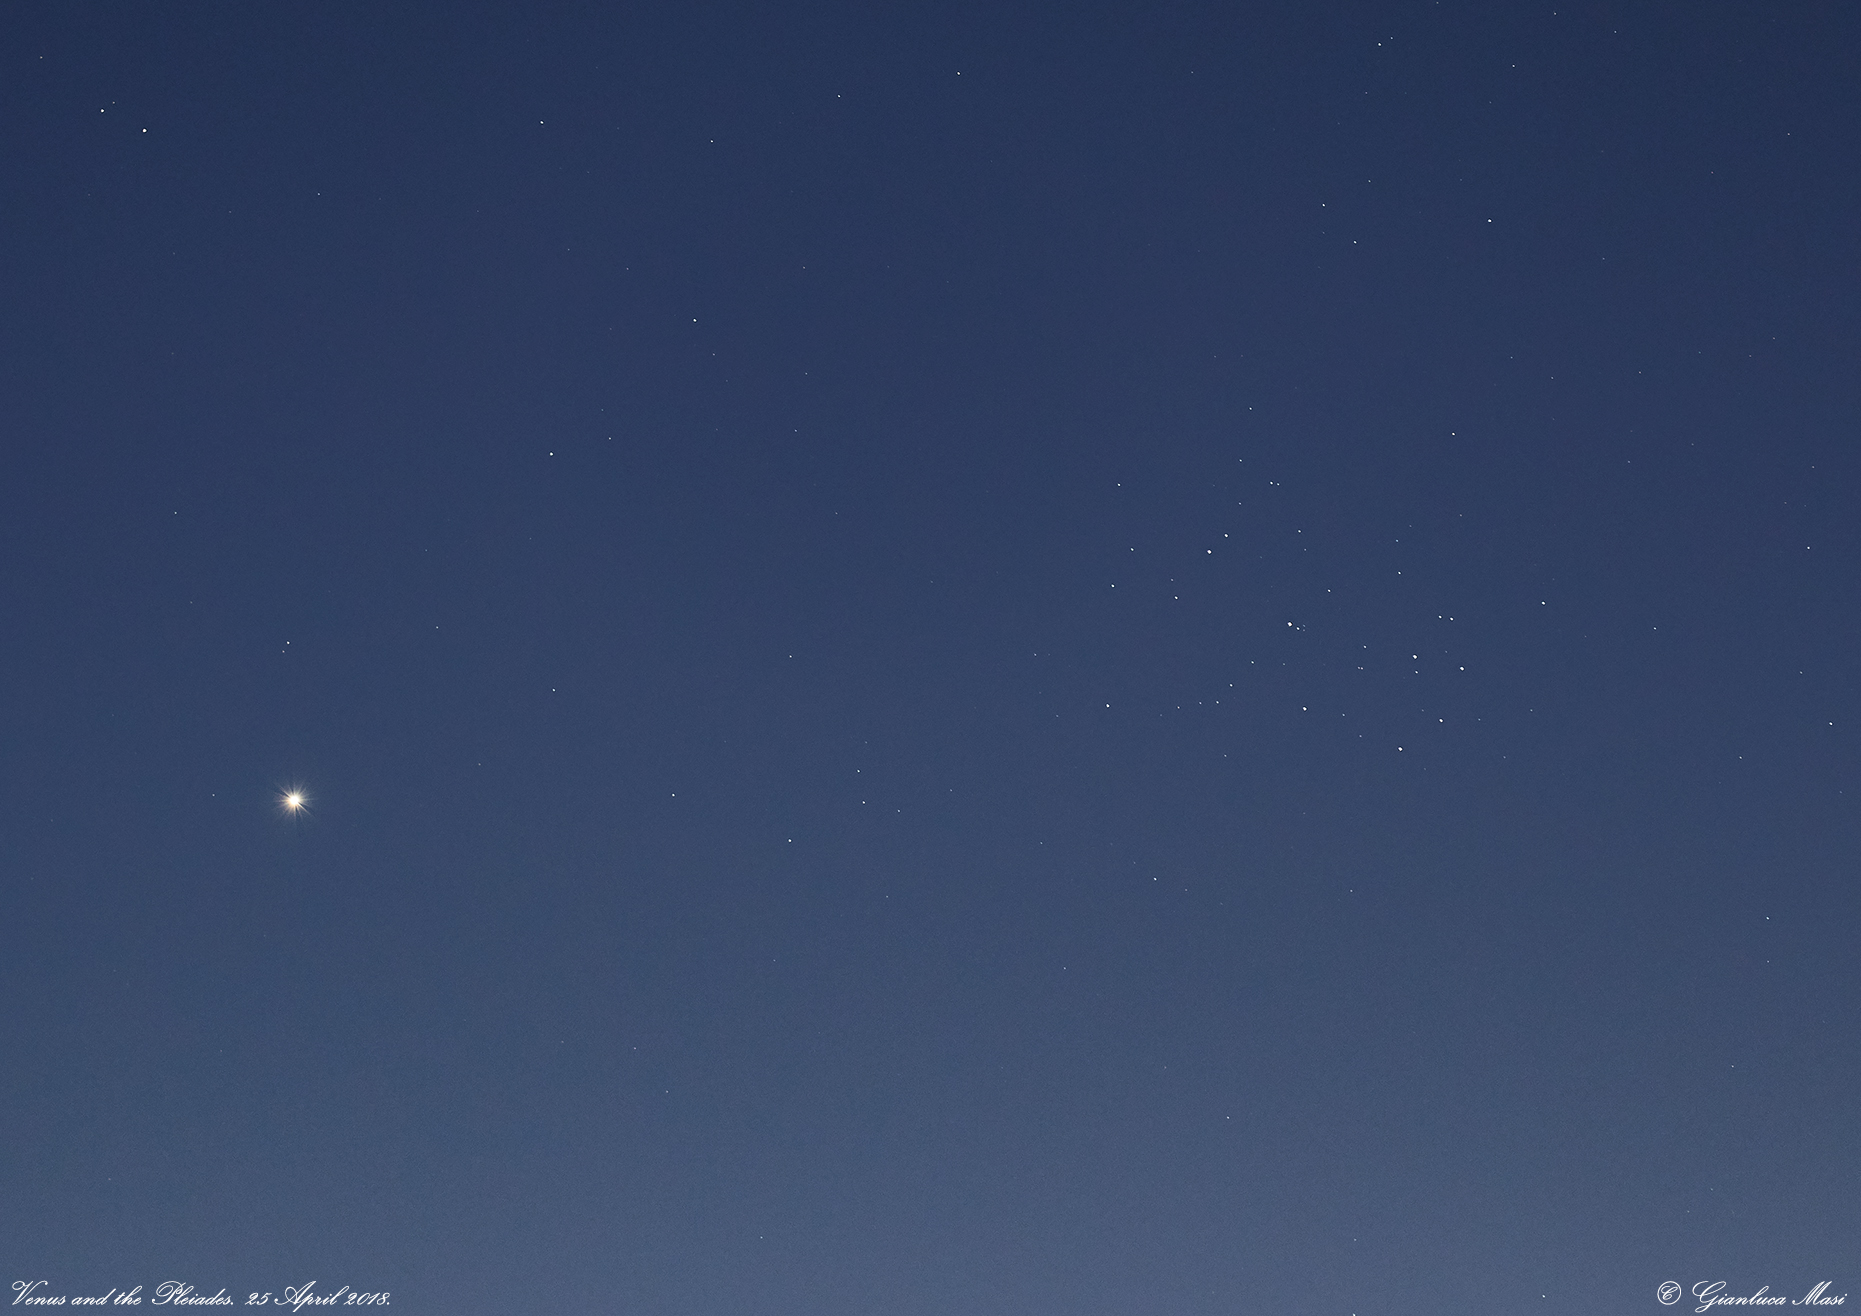 A close-up showing planet Venus and Pleiades